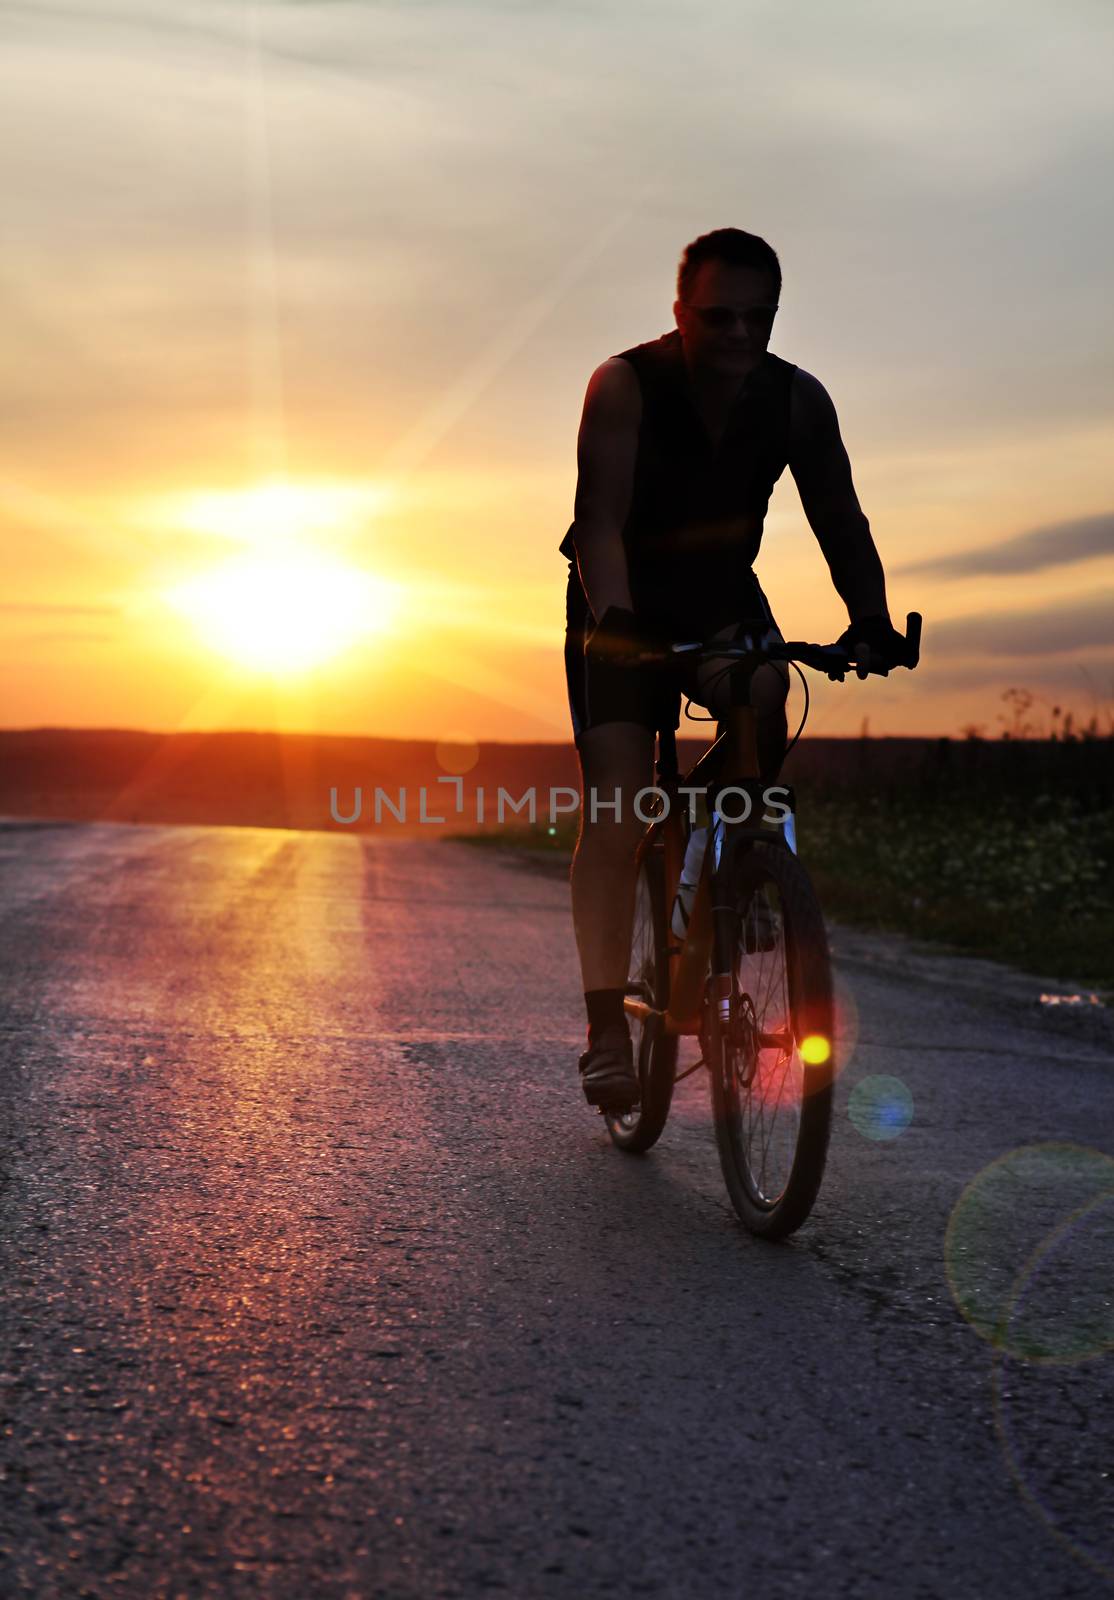 cyclist at sunset time by ssuaphoto